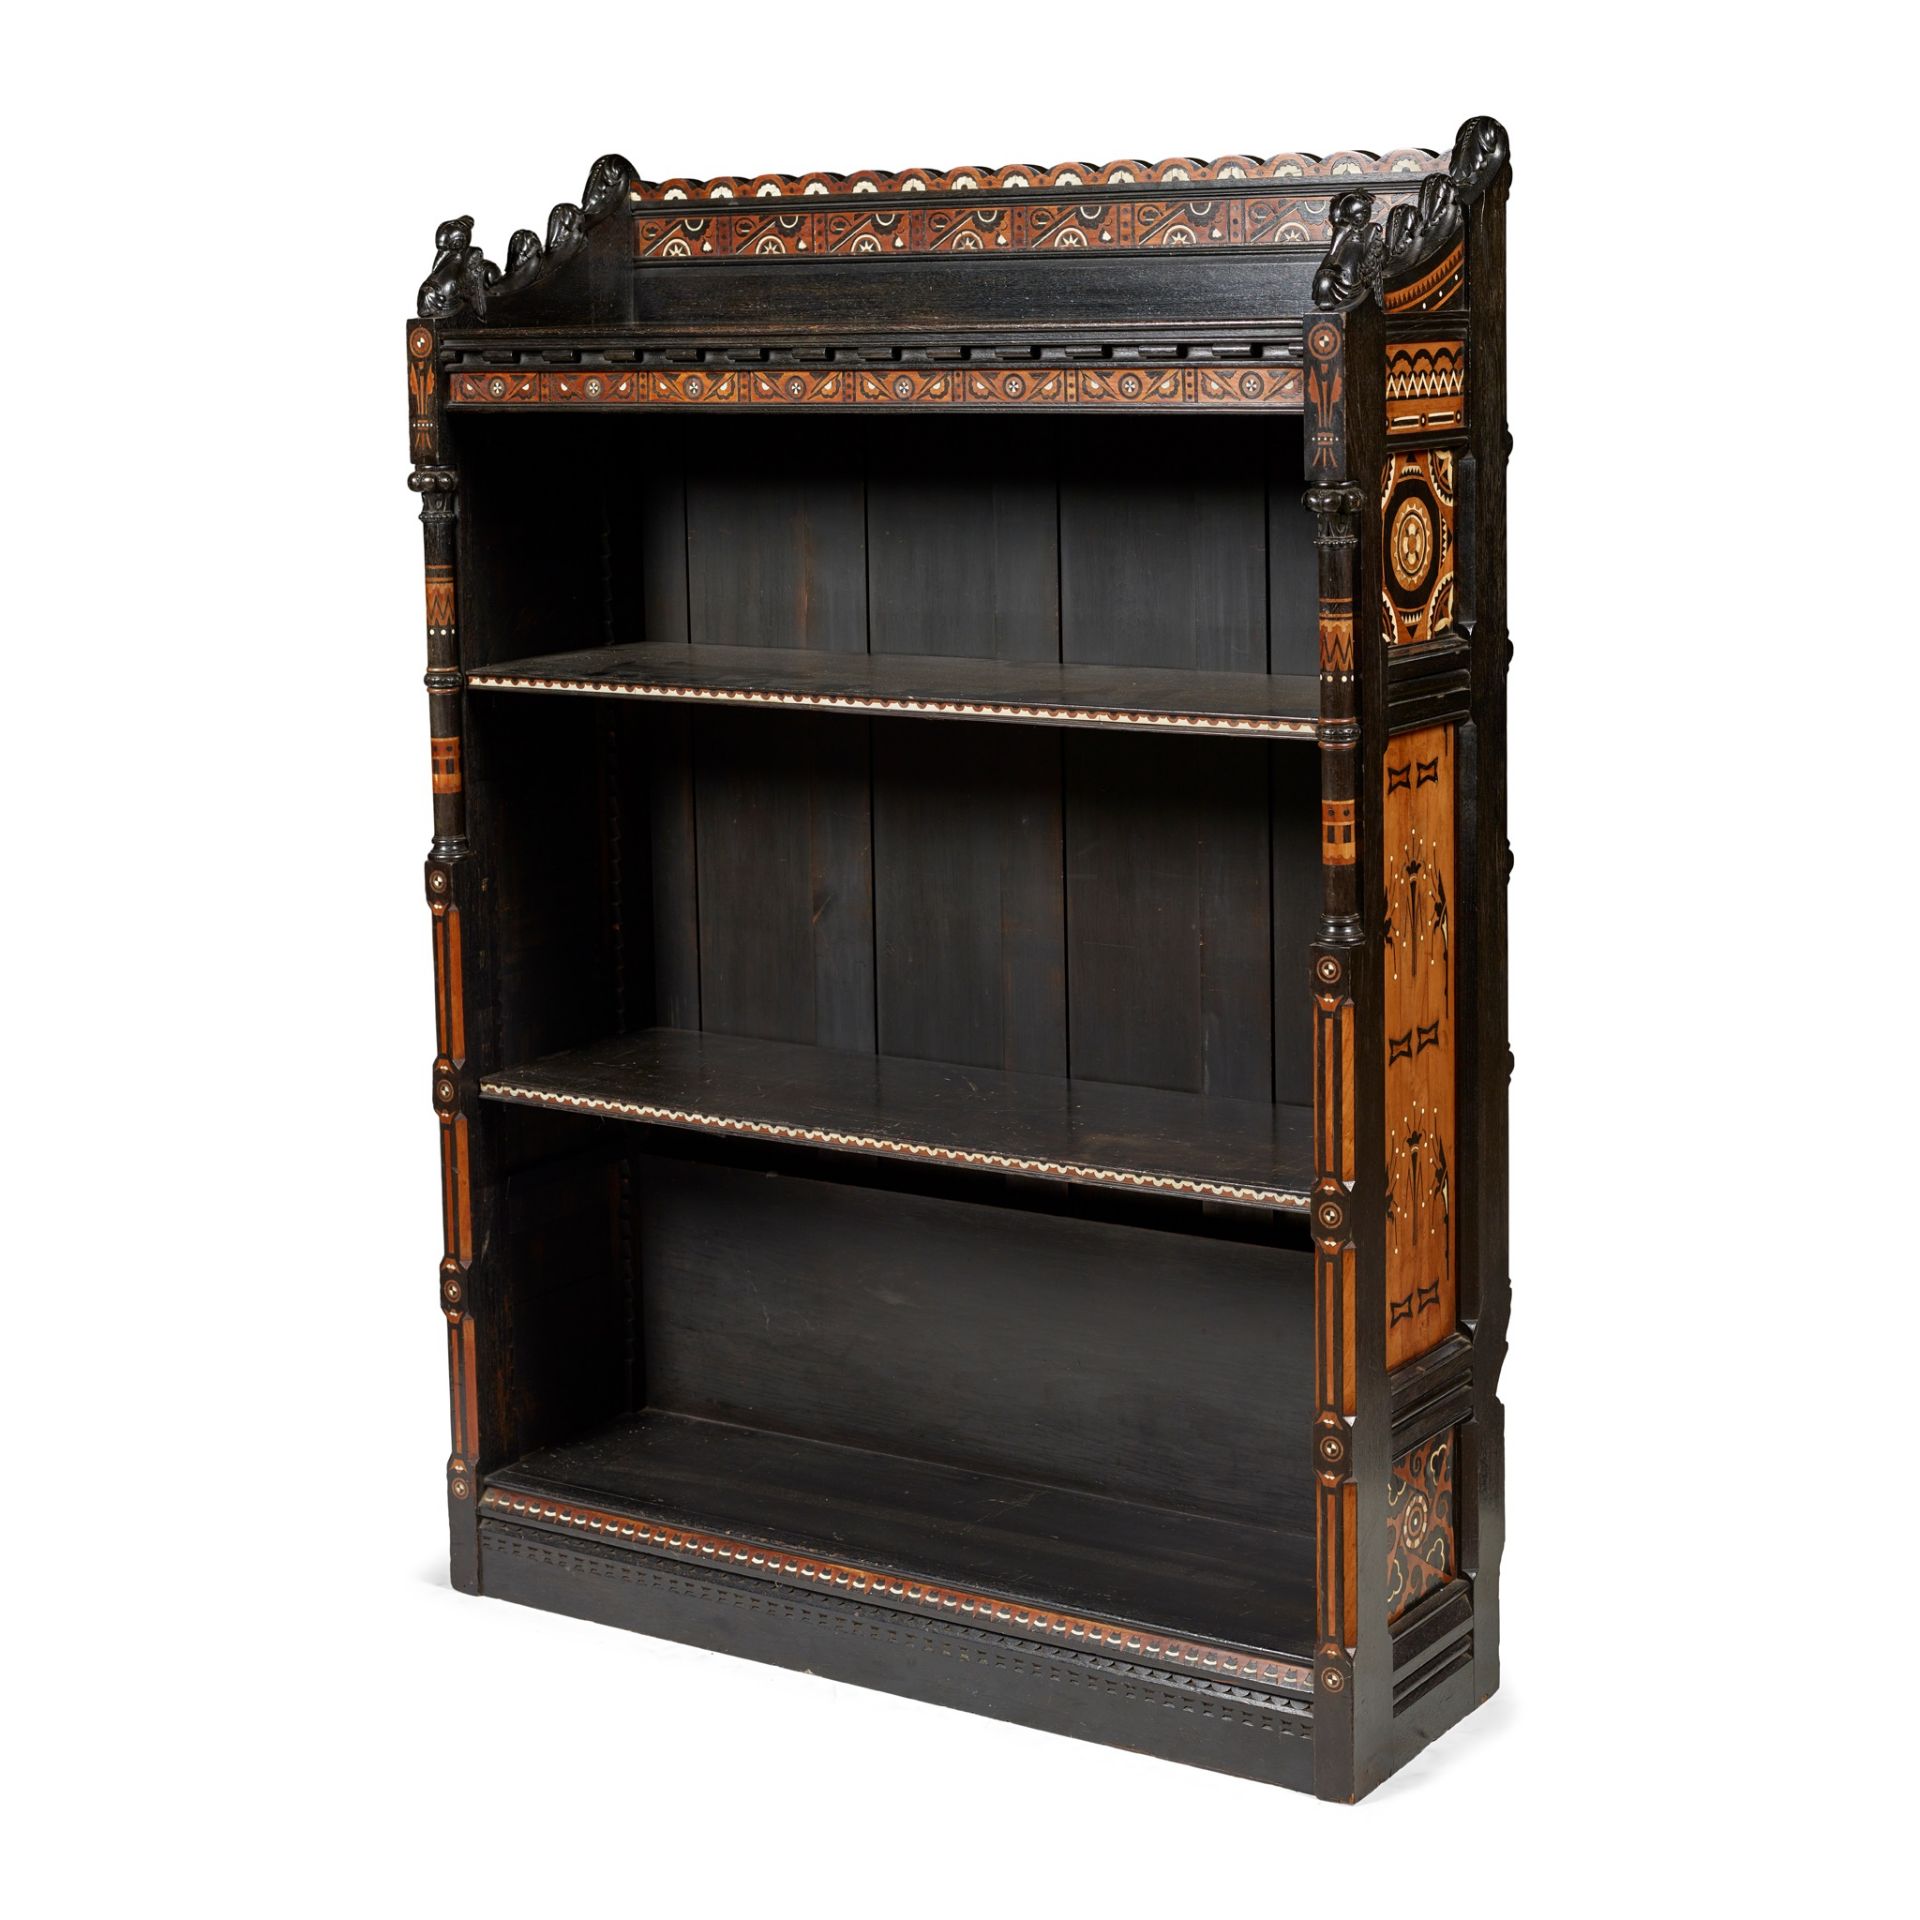 Y STYLE OF CHRISTOPHER DRESSER FOR PRATT & PRINCE, BRADFORD PAIR OF BOOKCASES, CIRCA 1880 - Image 3 of 4